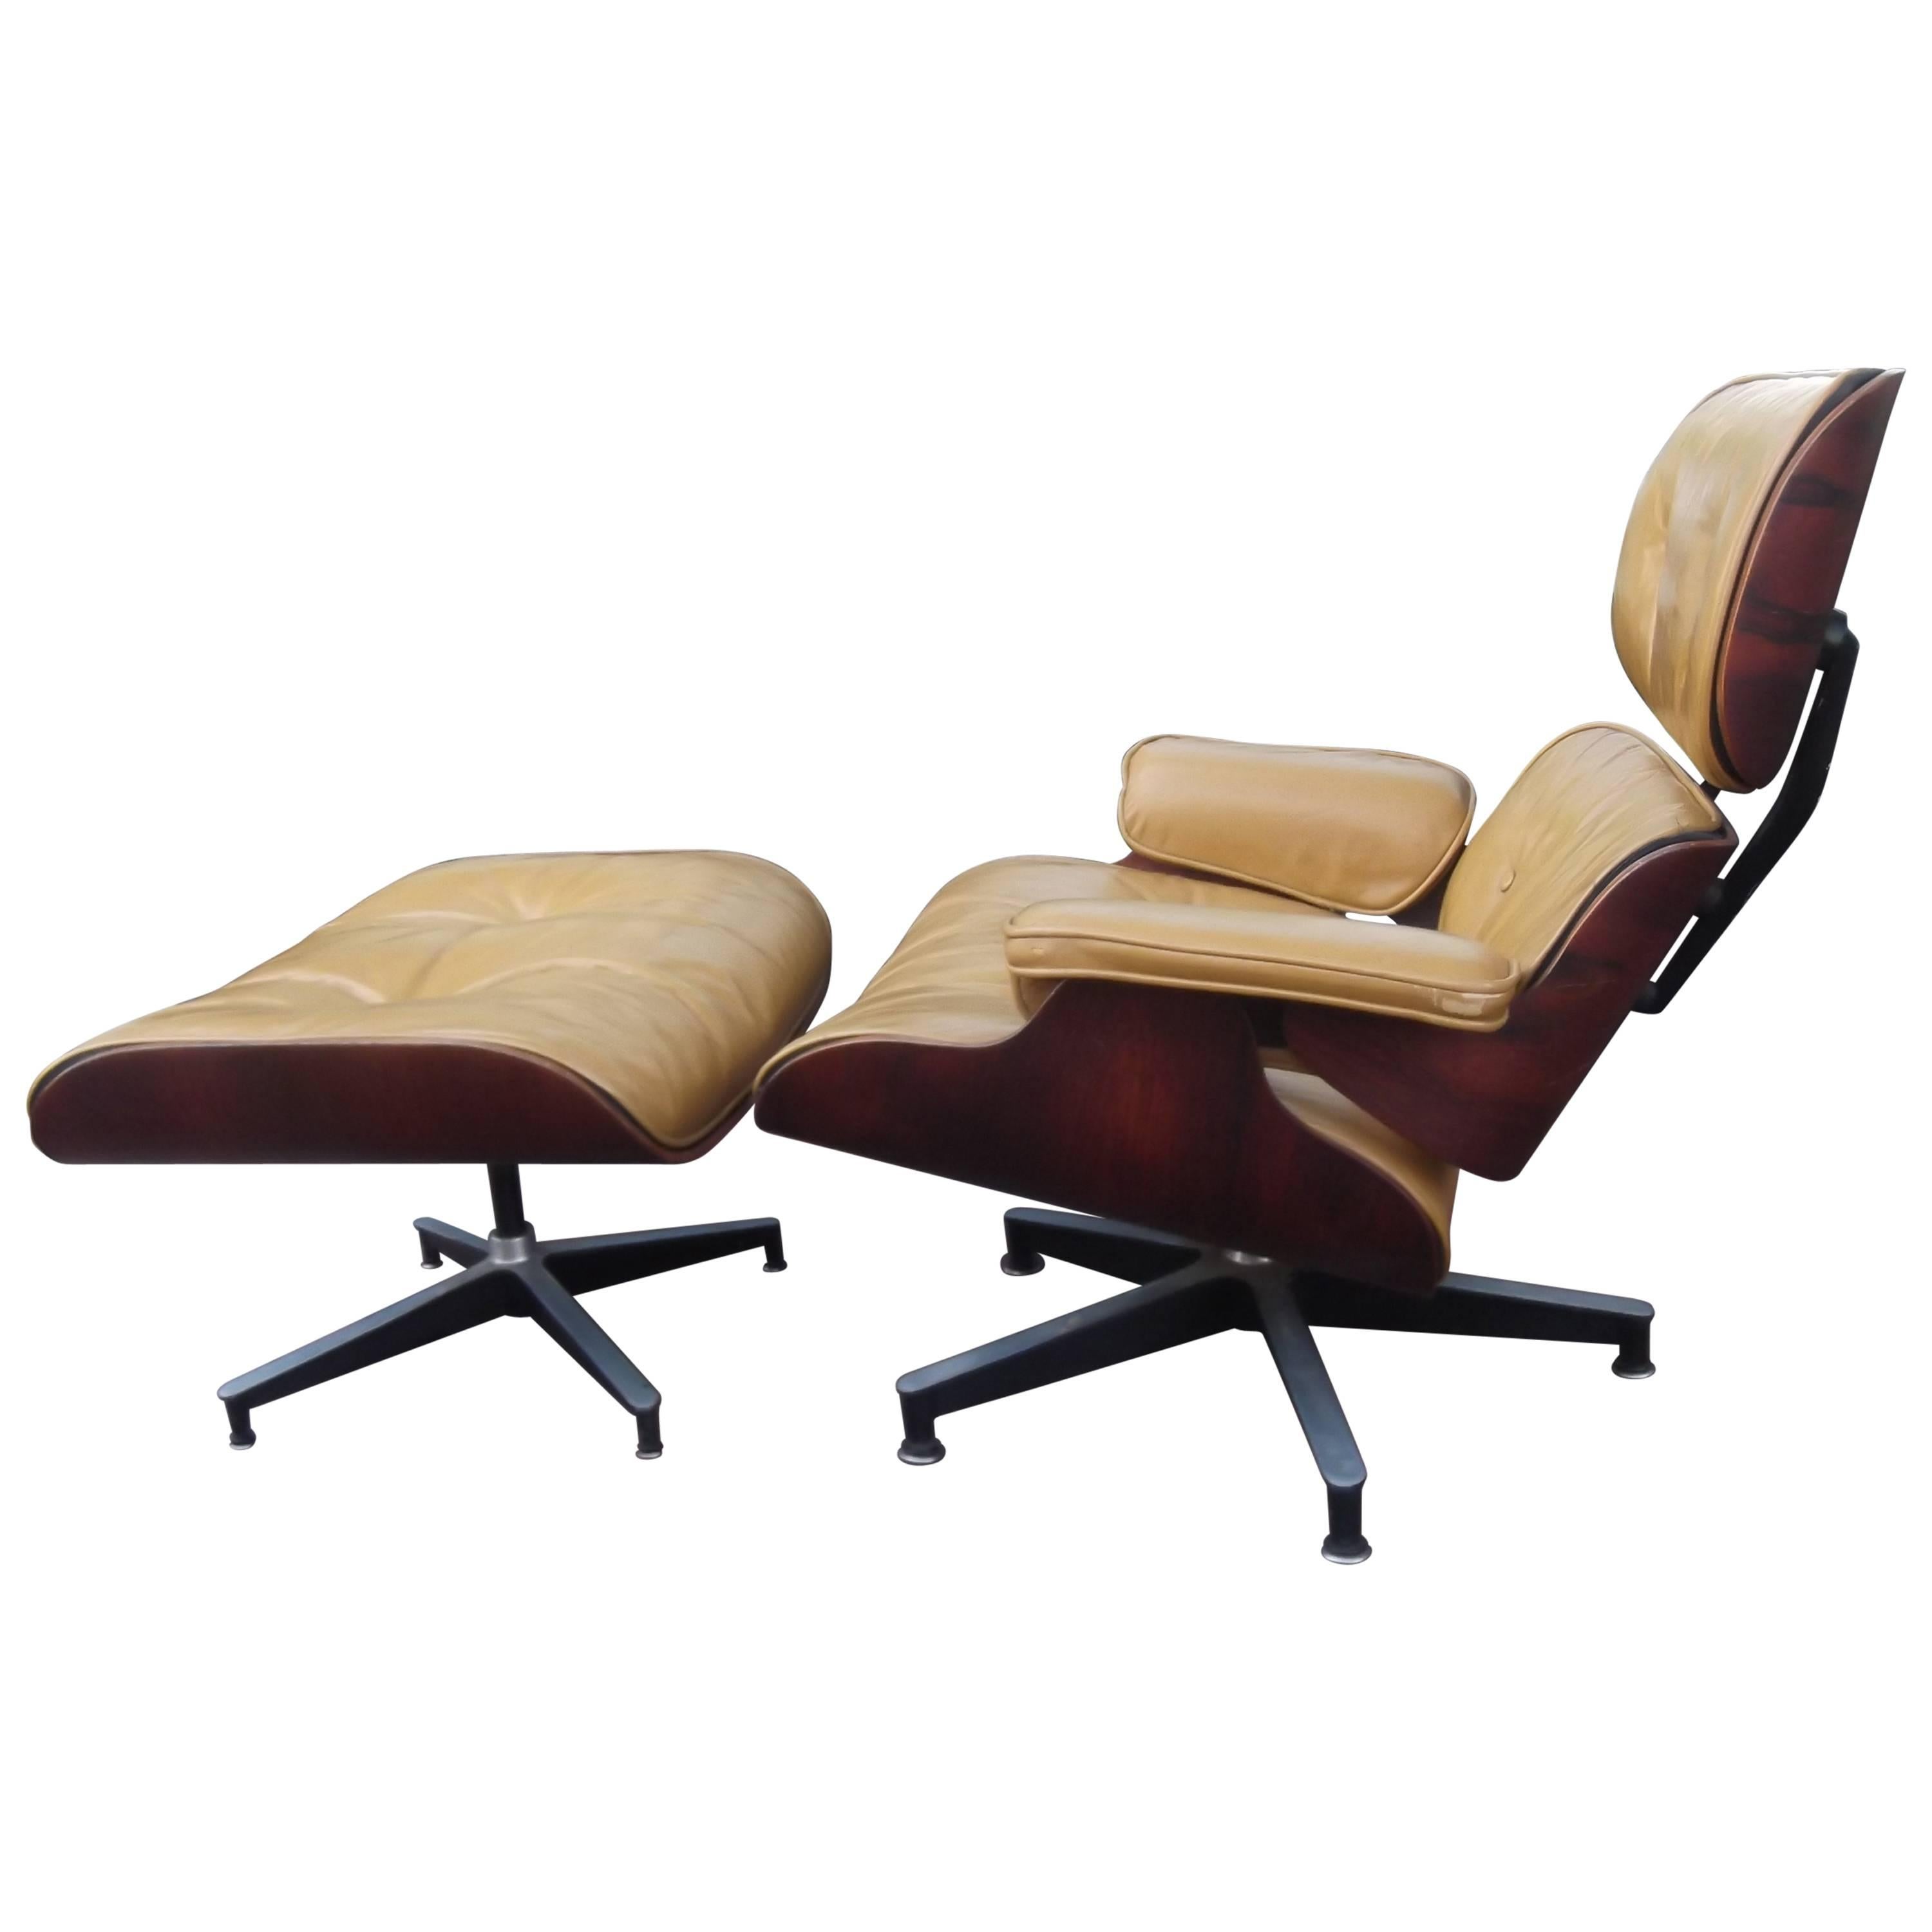 Herman Miller Eames Chair and Ottoman Number 670 and 671